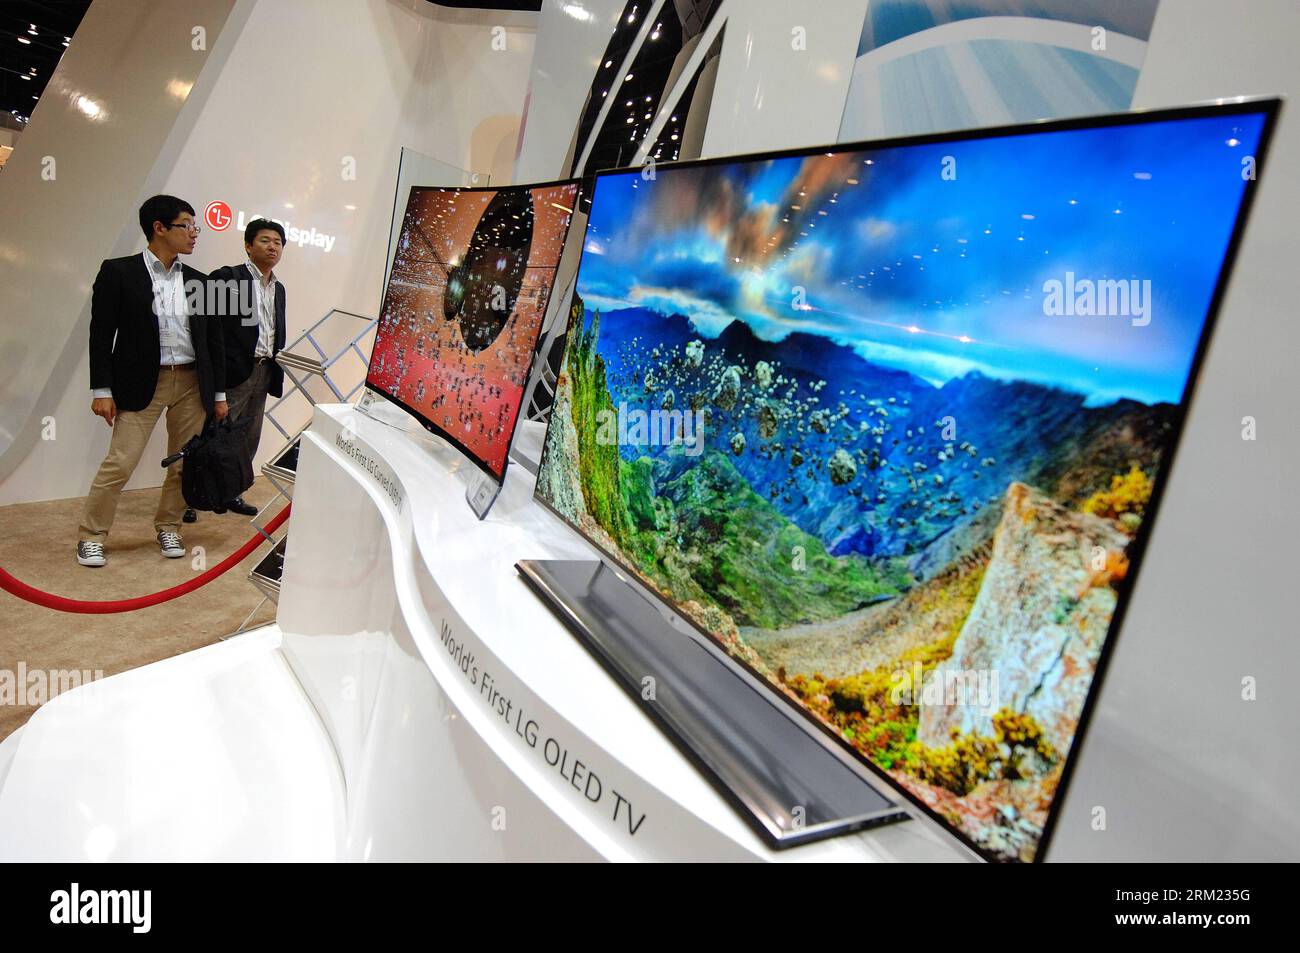 lg curved tv